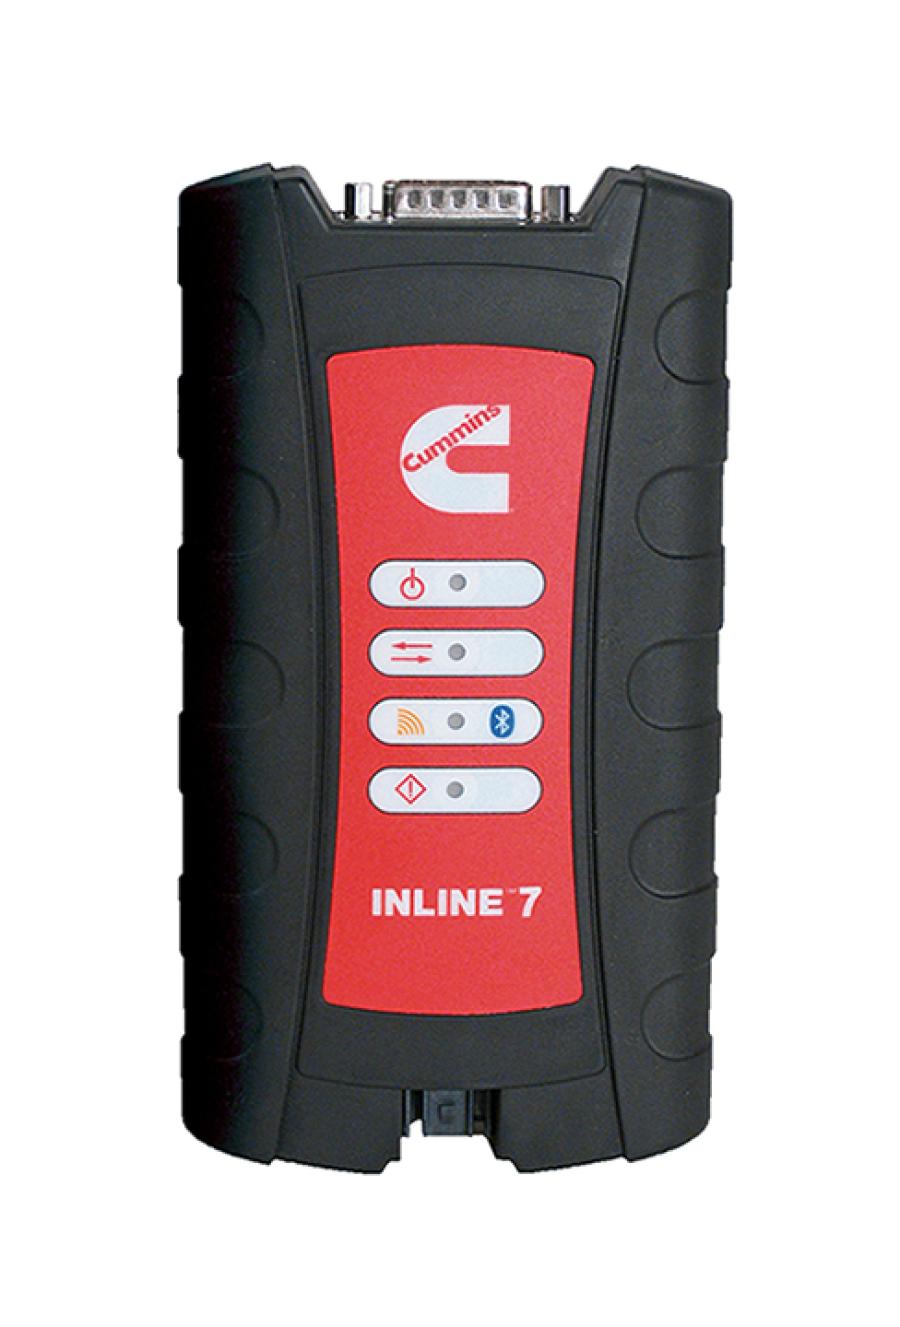 INLINE 7 offers Wi-Fi and Bluetooth wireless connectivity while also providing traditional wired functionality via USB.